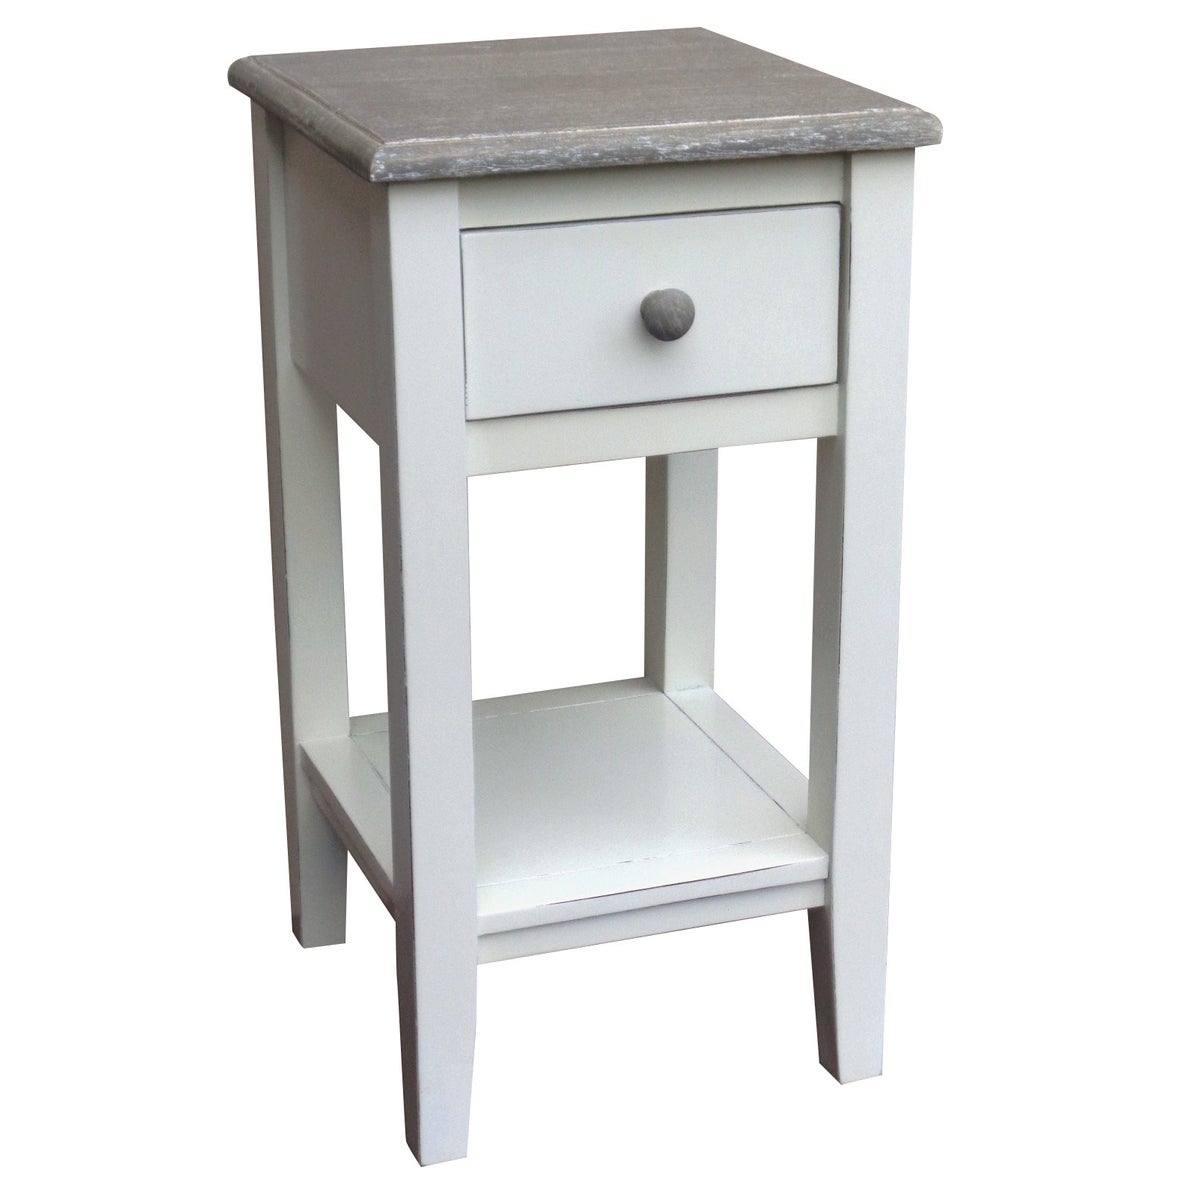 MISSION ACCENT TABLE - RW+/WHT+